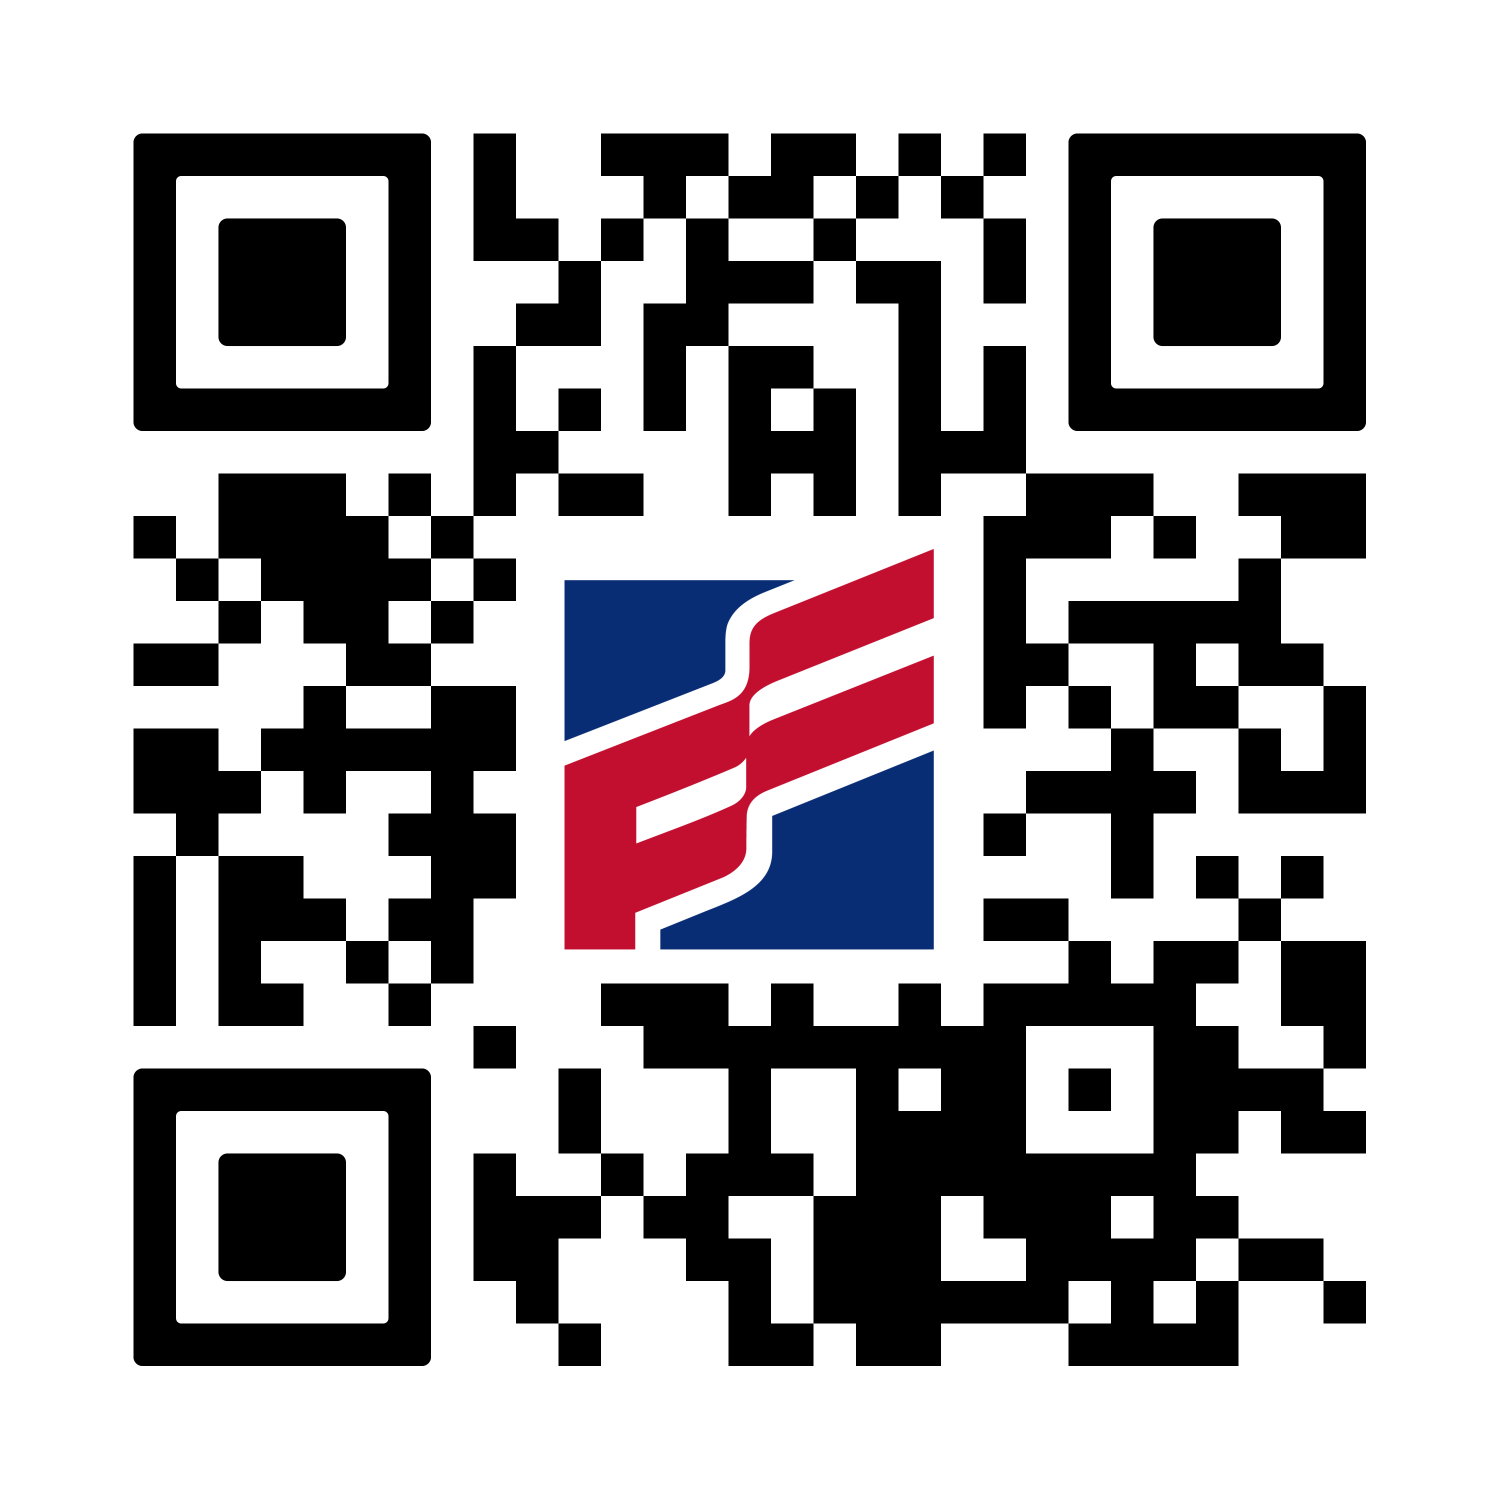 QR Scan Code for Reporting Ethical Concerns